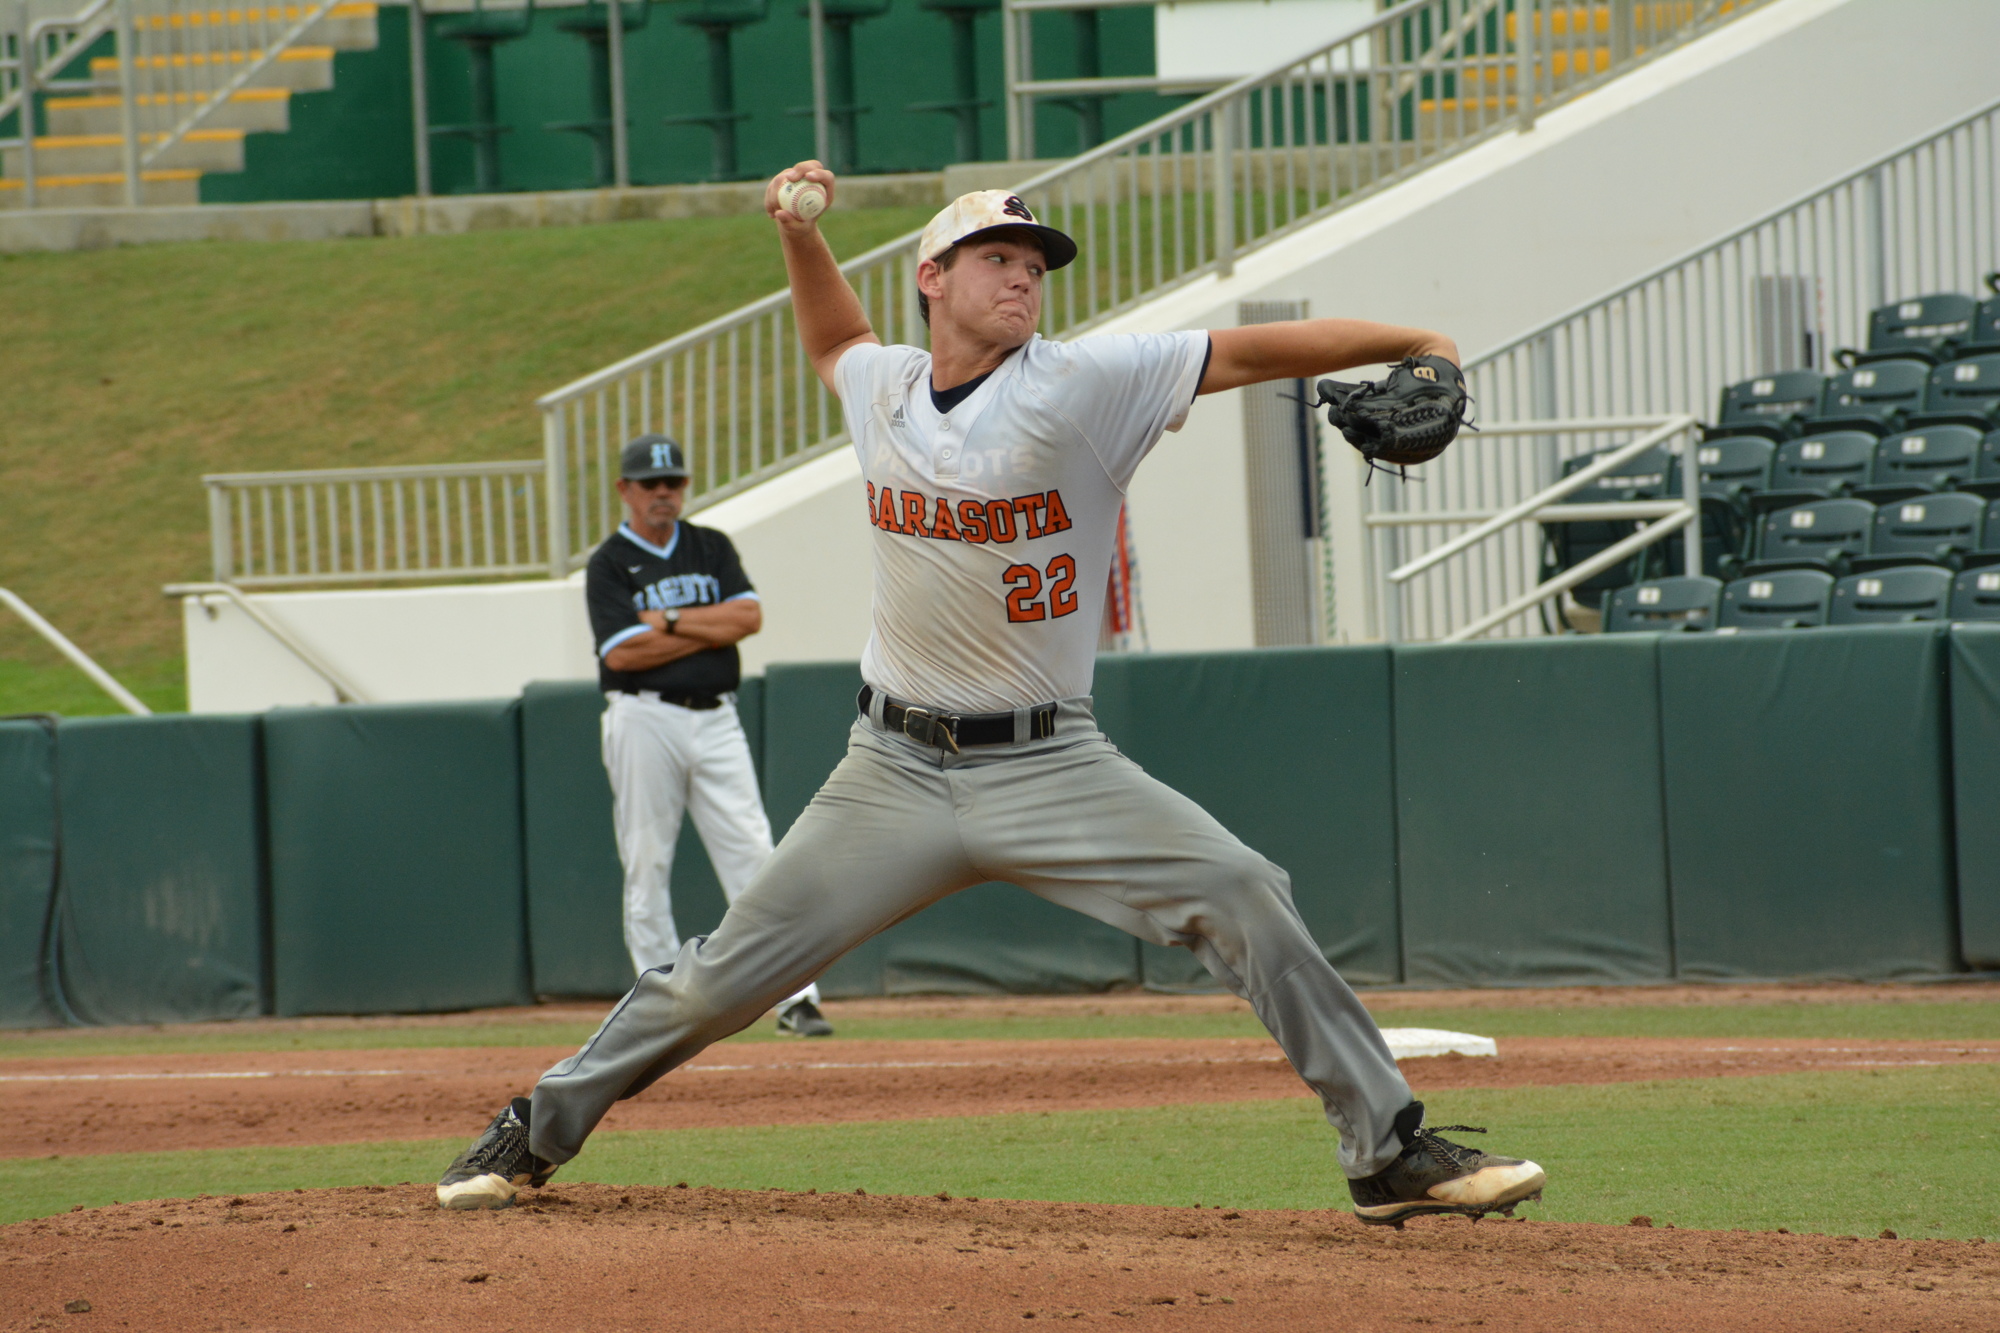 Brooks Larson throws a pitch against Hagerty.